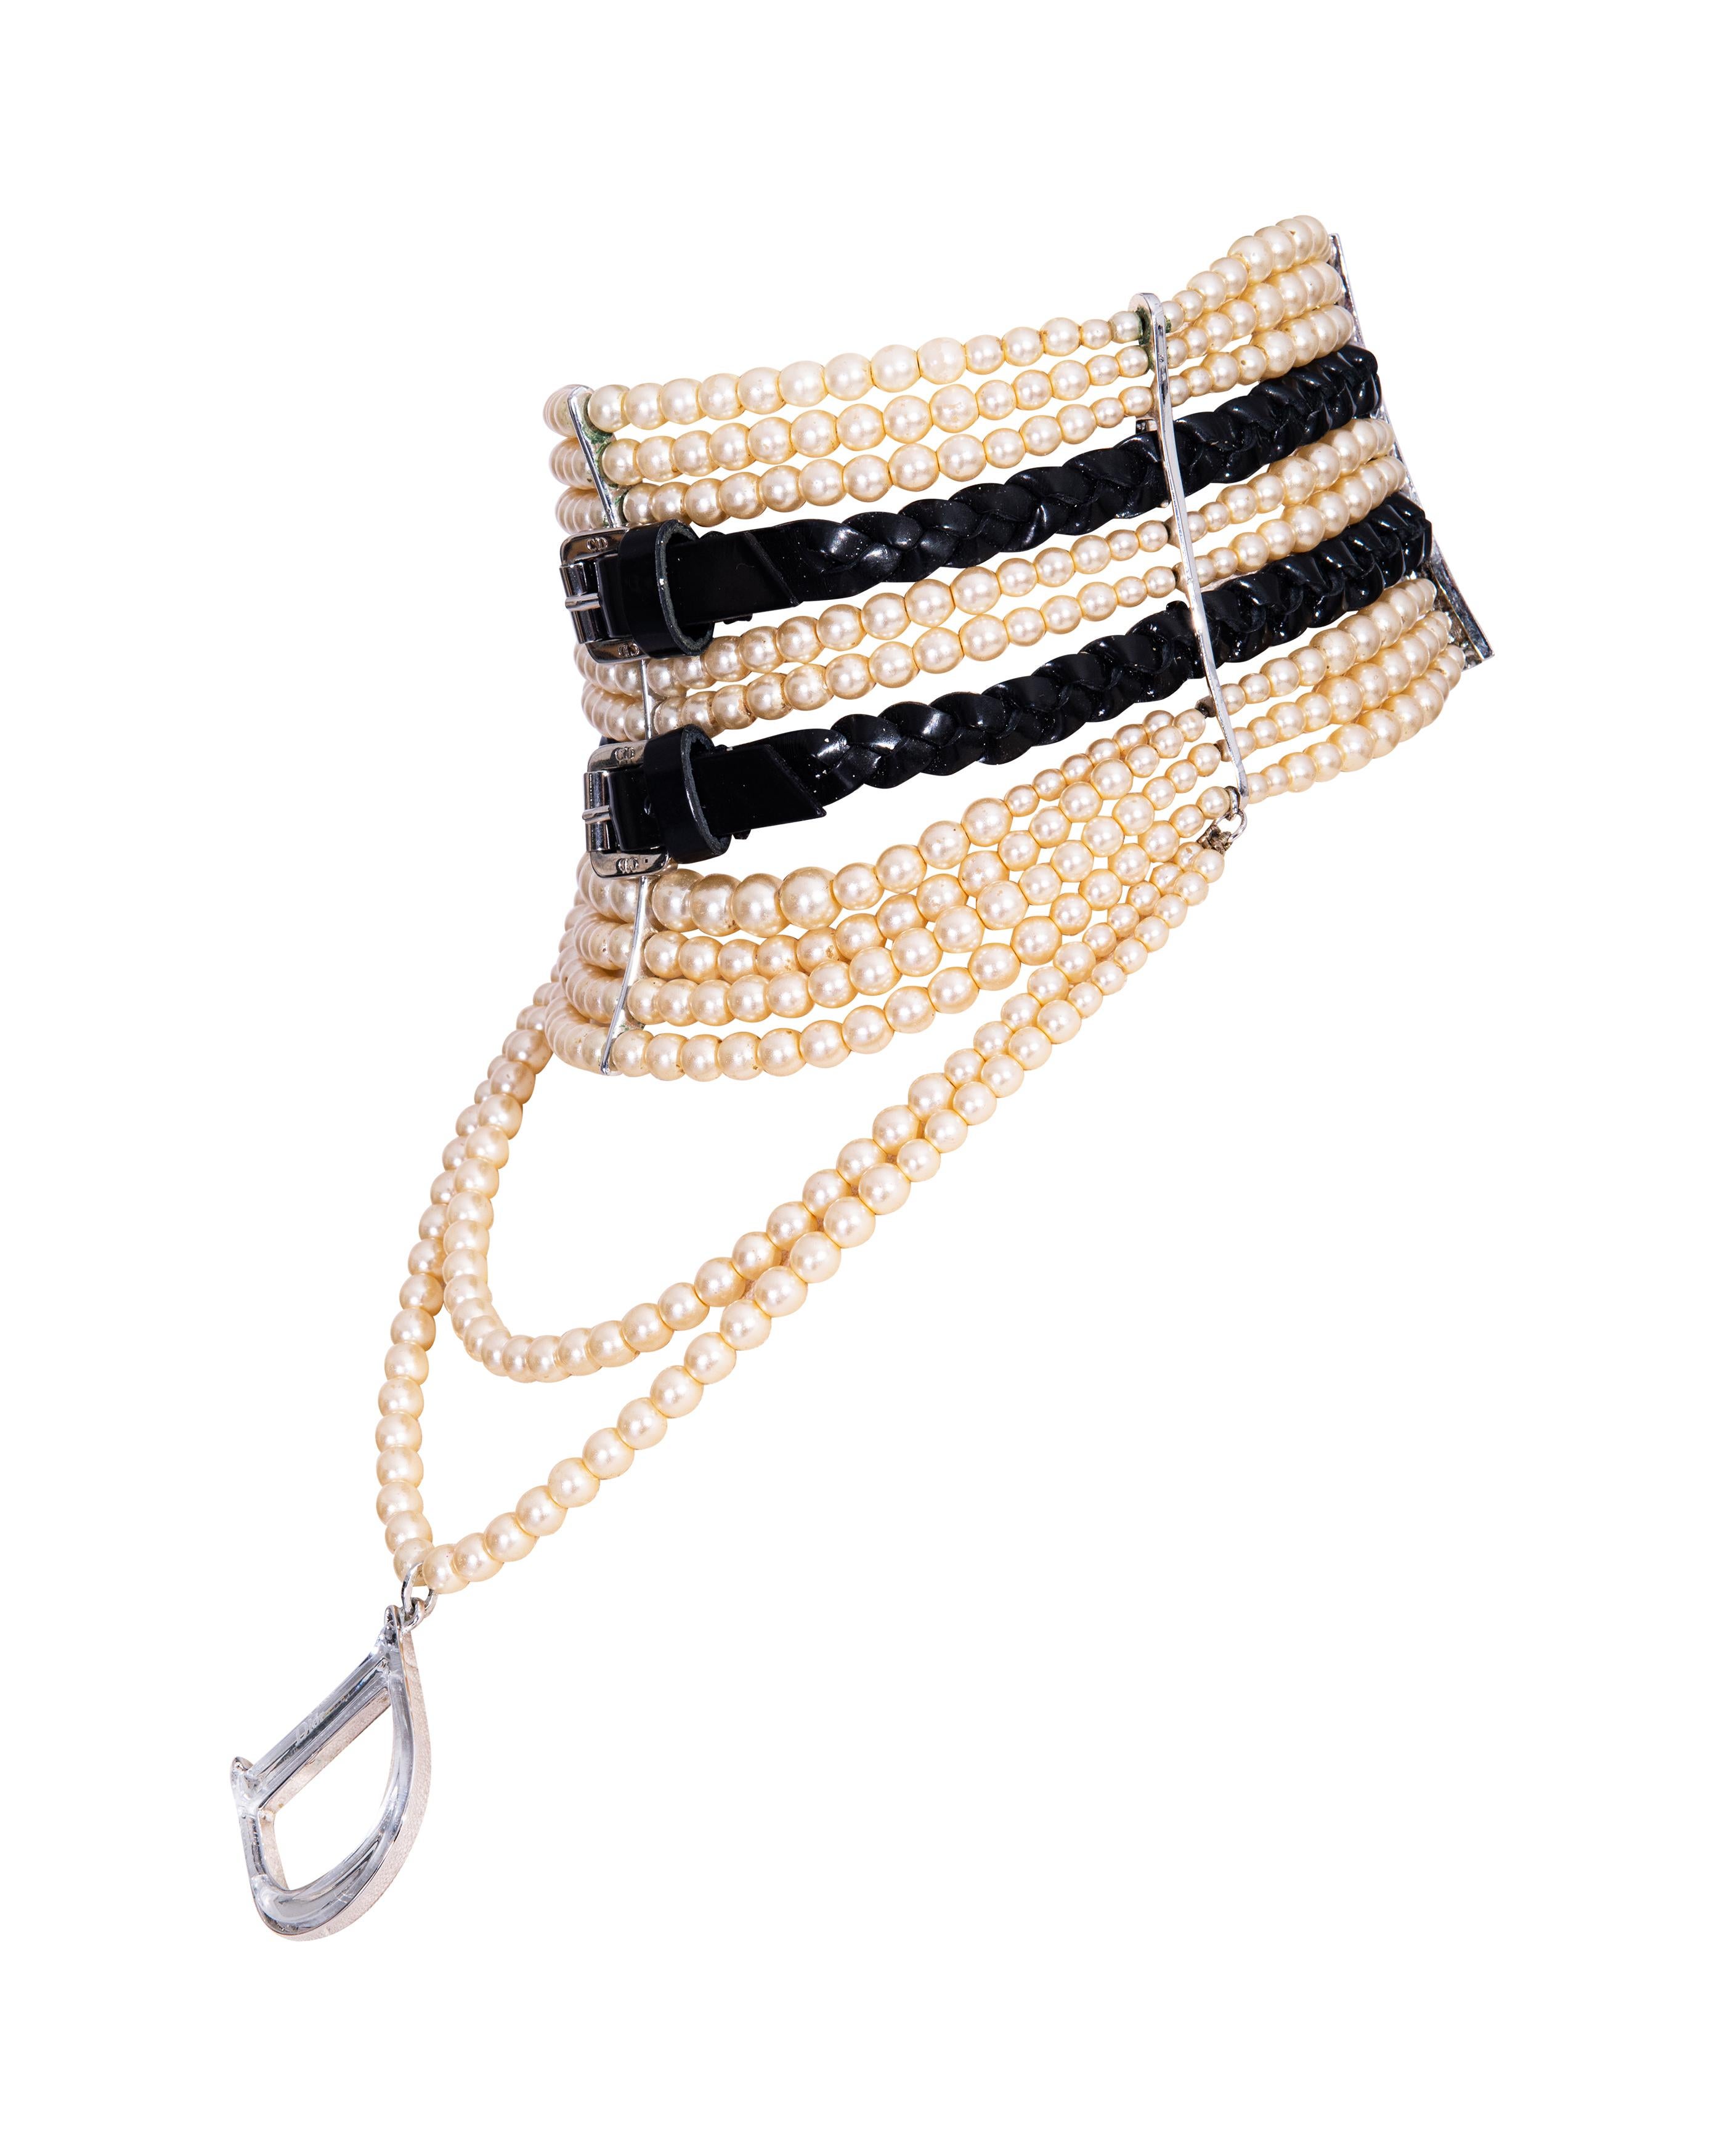 S/S 2004 Christian Dior by John Galliano Pearl and Black Leather Choker Necklace 3